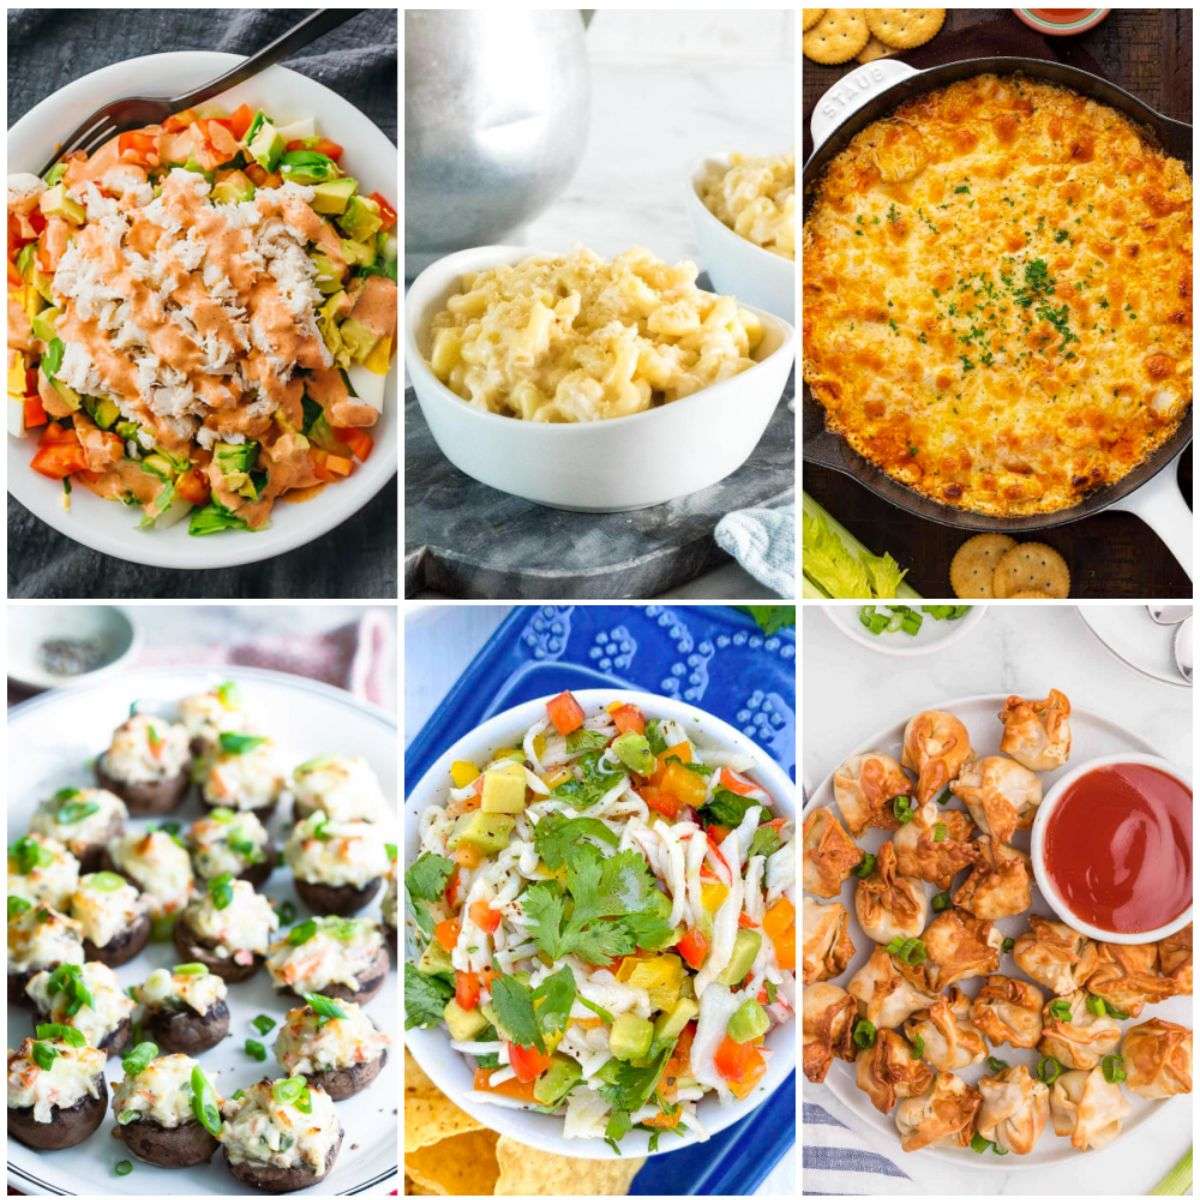 21 Easy Imitation Crab Recipes That Are Crowd Pleasers - Coastal Wandering